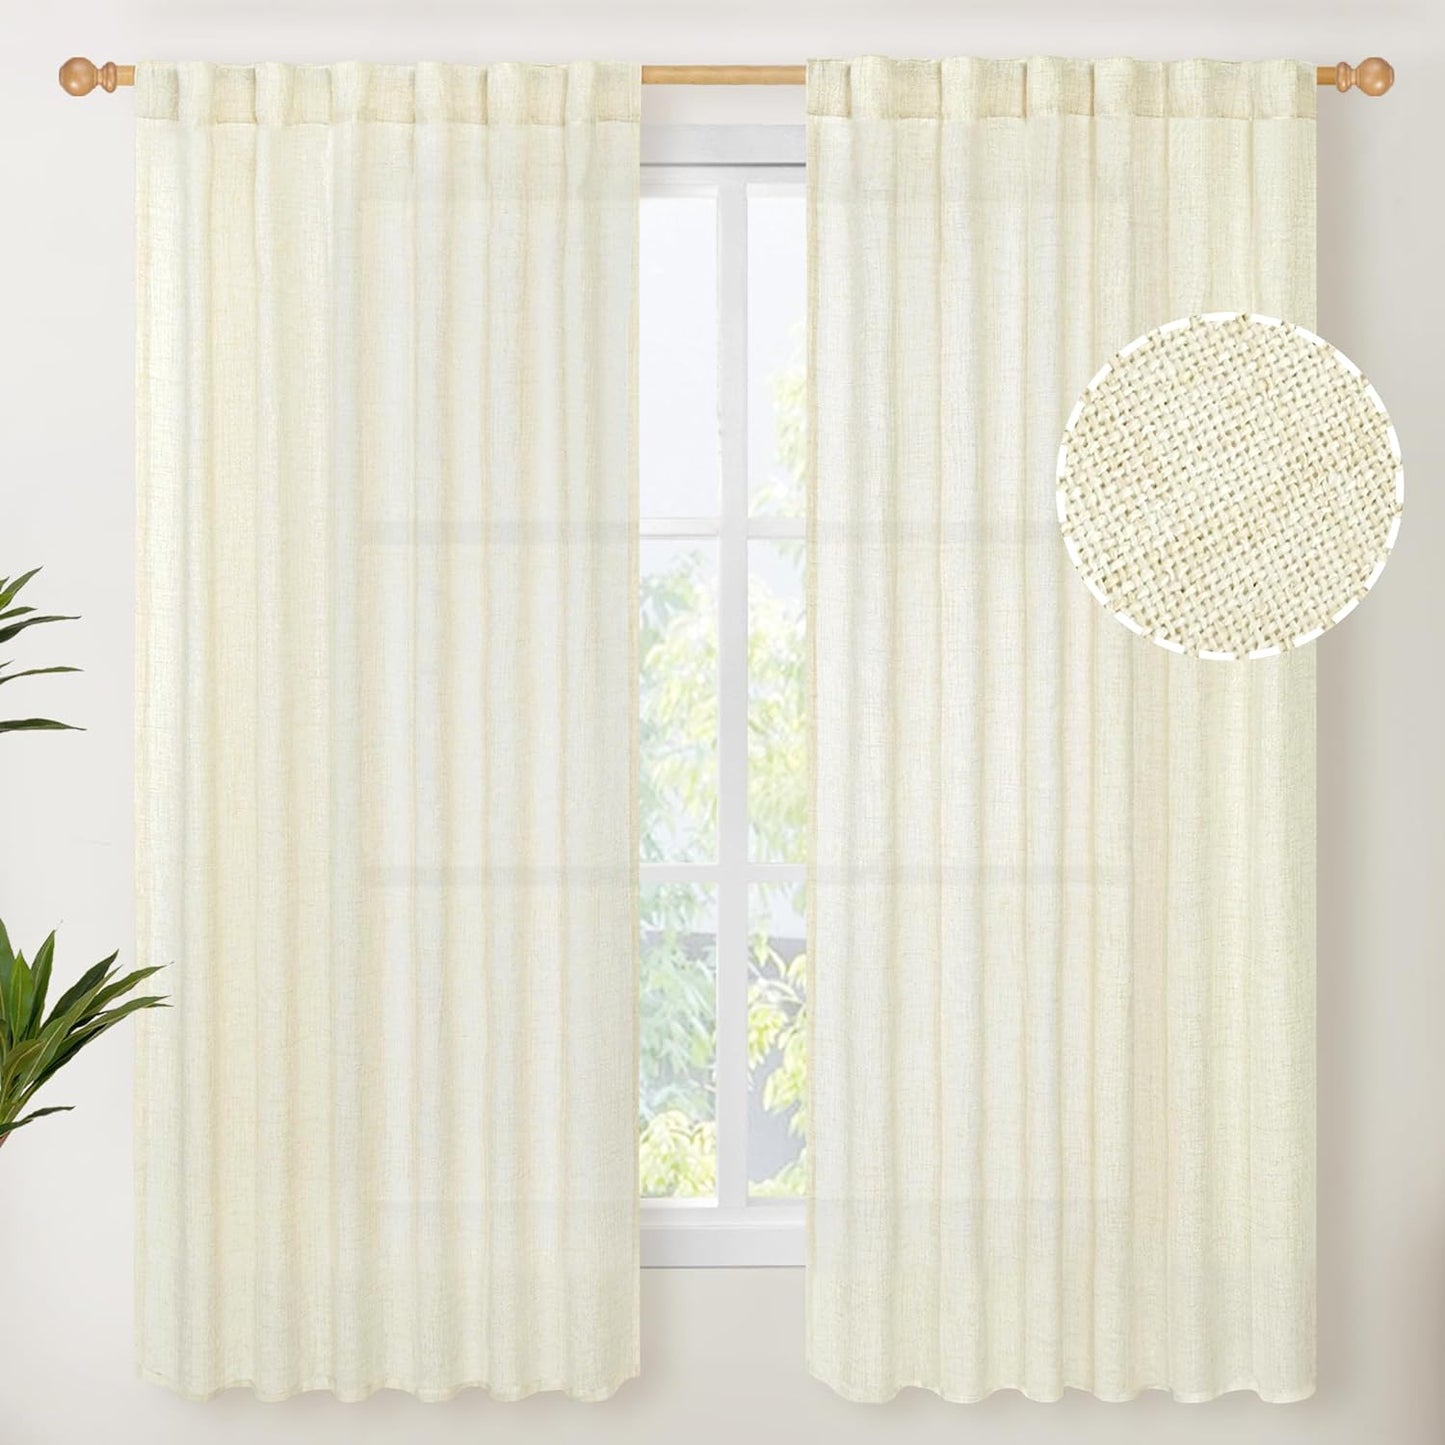 Youngstex Natural Linen Curtains 72 Inch Length 2 Panels for Living Room Light Filtering Textured Window Drapes for Bedroom Dining Office Back Tab Rod Pocket, 52 X 72 Inch  YoungsTex Cream 52W X 63L 